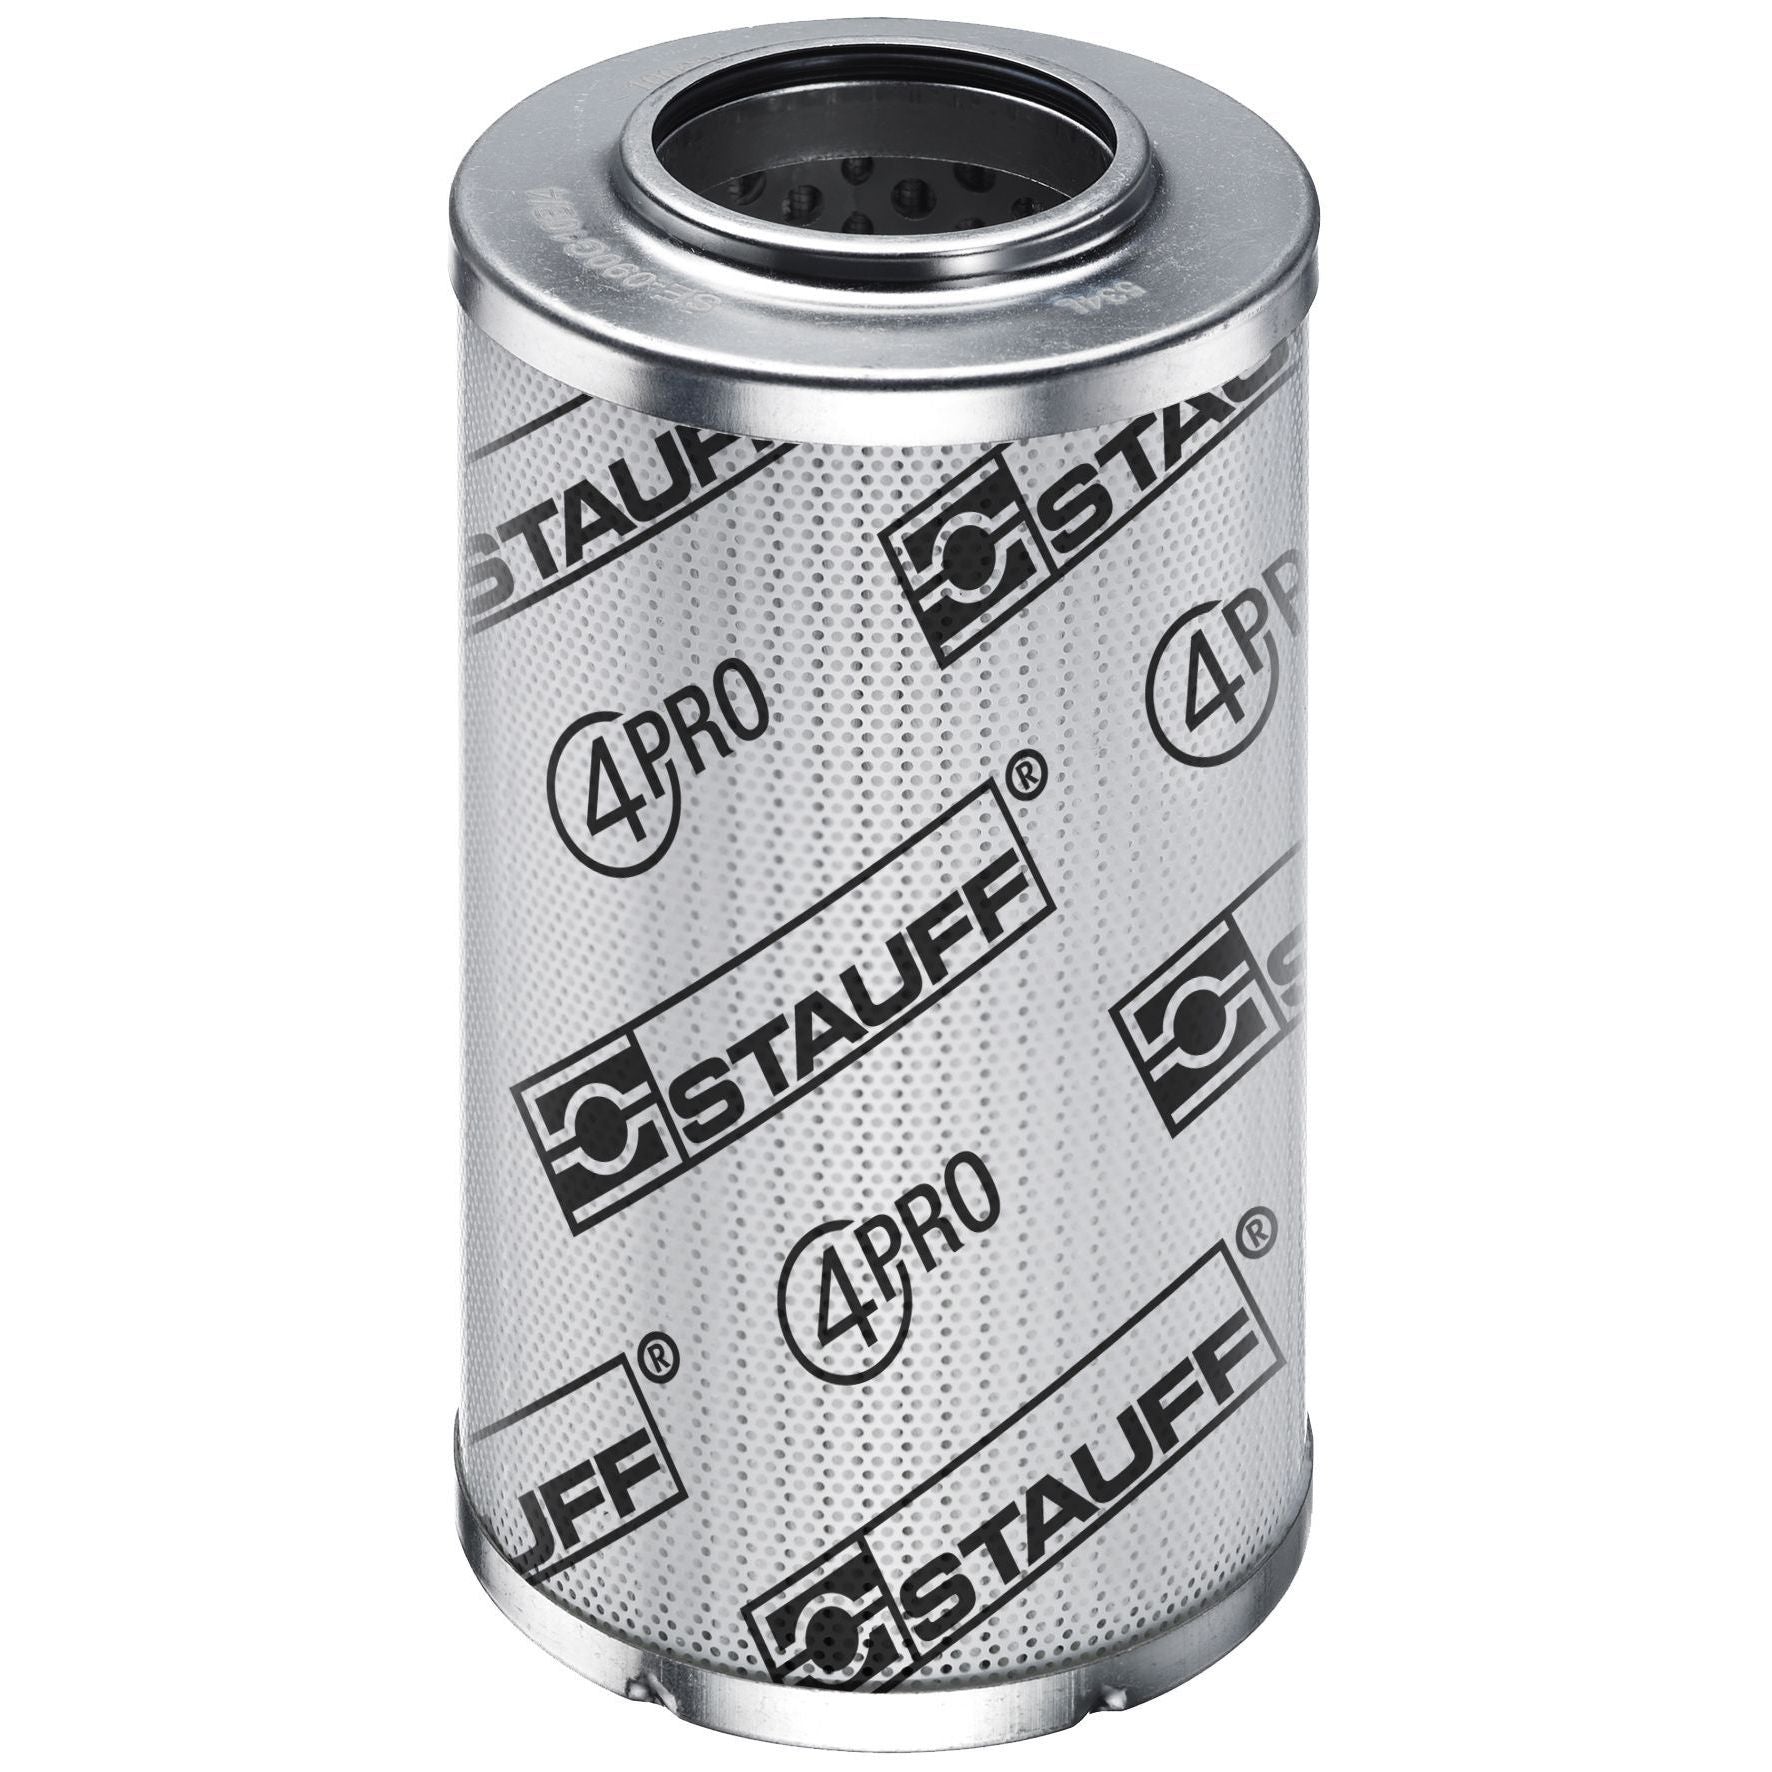 SE-030-S-200-B/3 : Stauff SF-030 Series Filter Element, 200 Micron, Stainless Mesh Media, 3045psi Collapse Differential, Buna